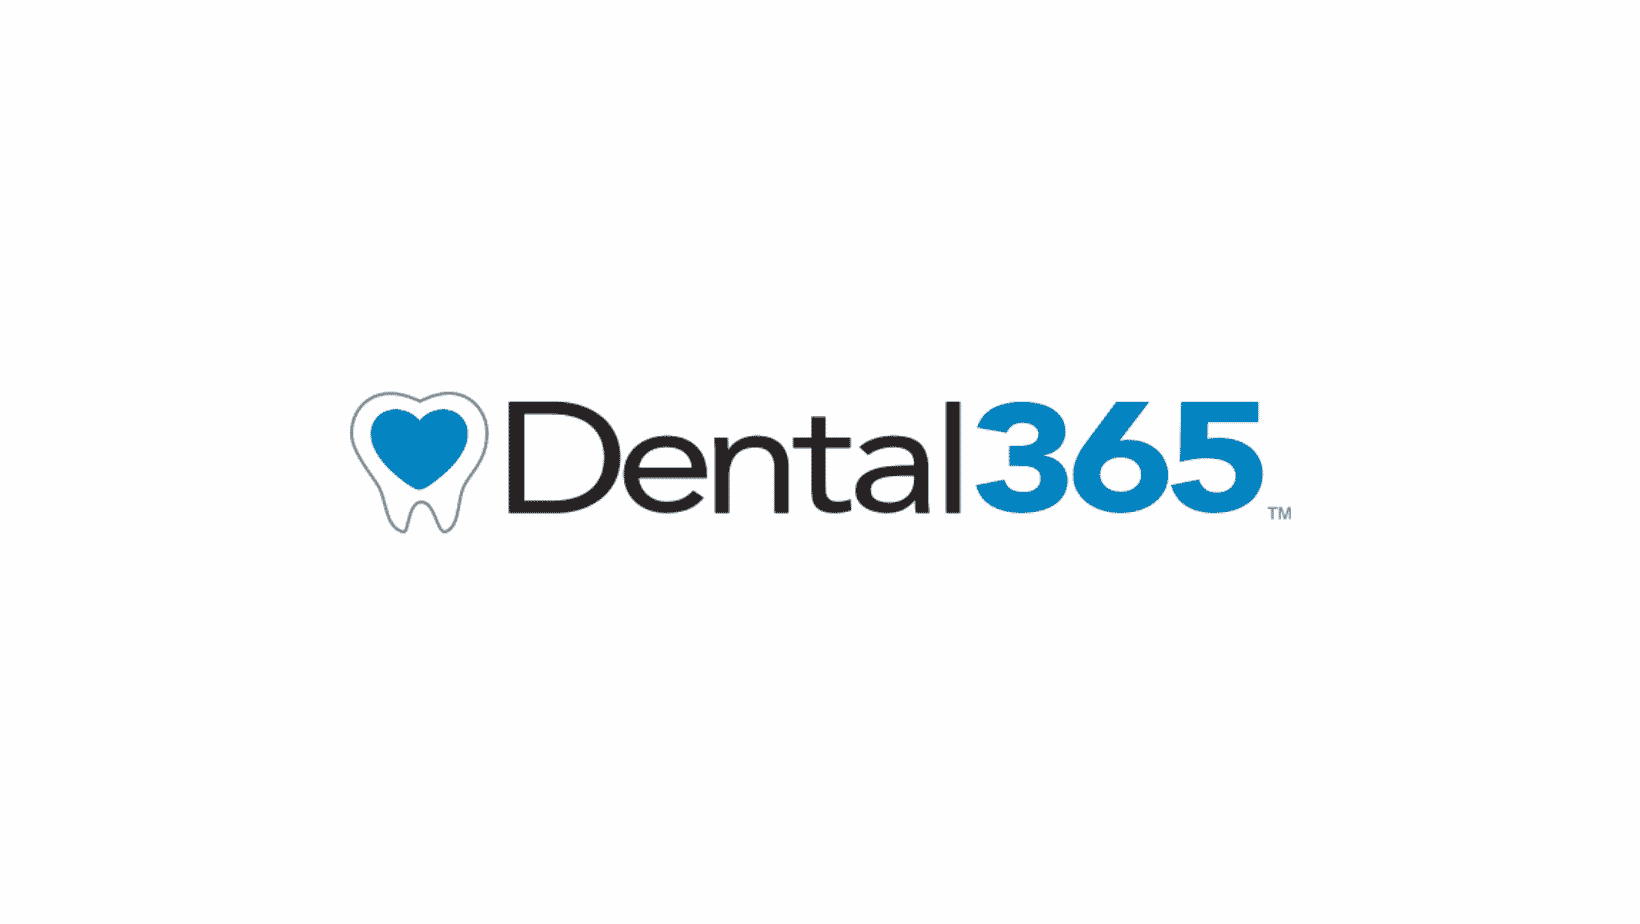 Dental365 Announces Formation of Hygiene Executive Committee